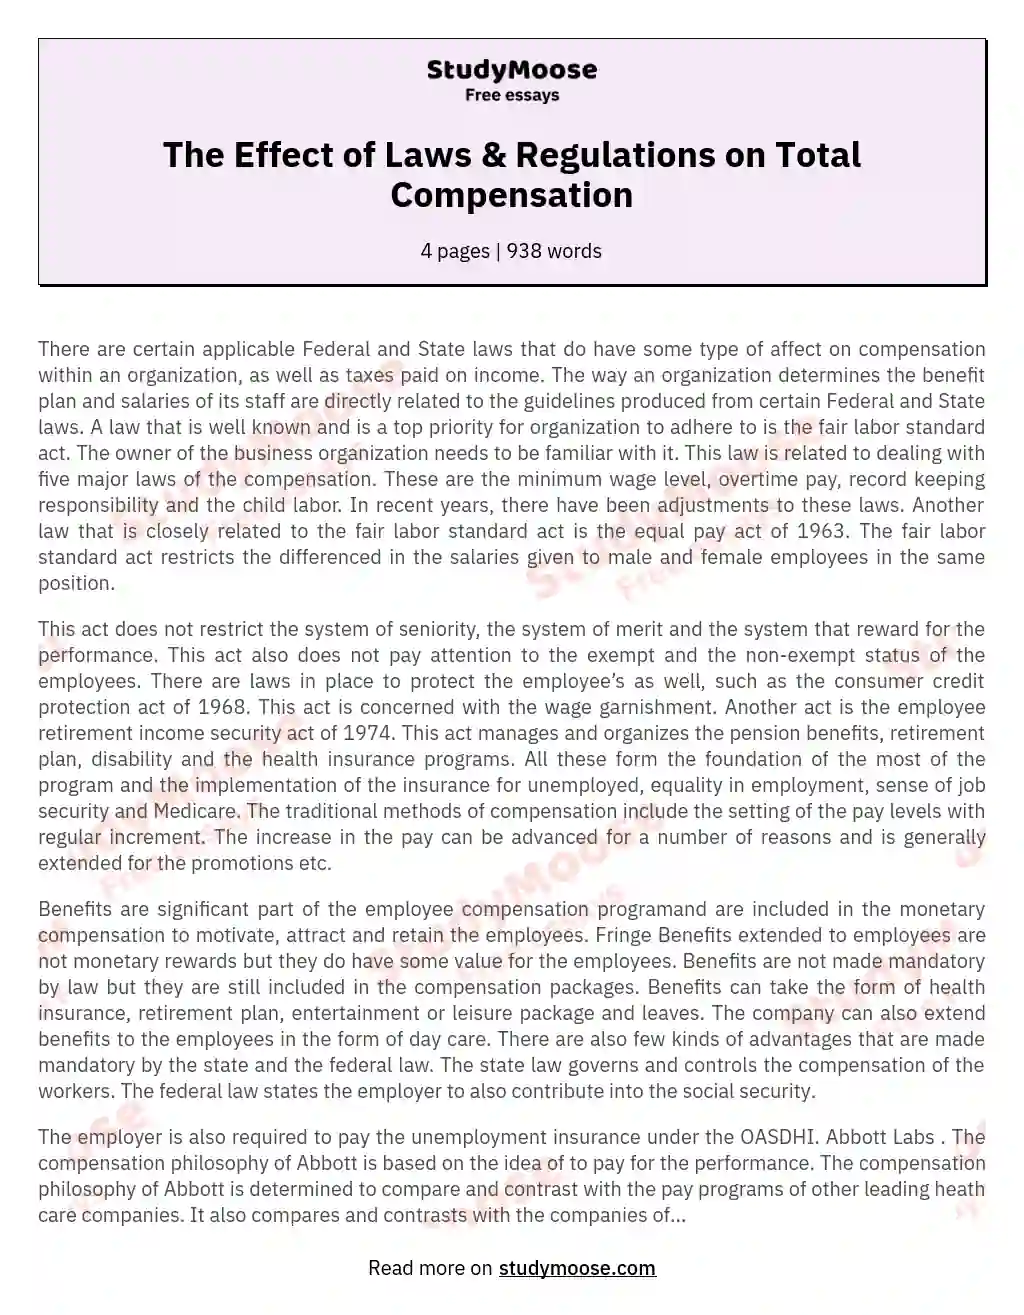 The Effect of Laws & Regulations on Total Compensation essay